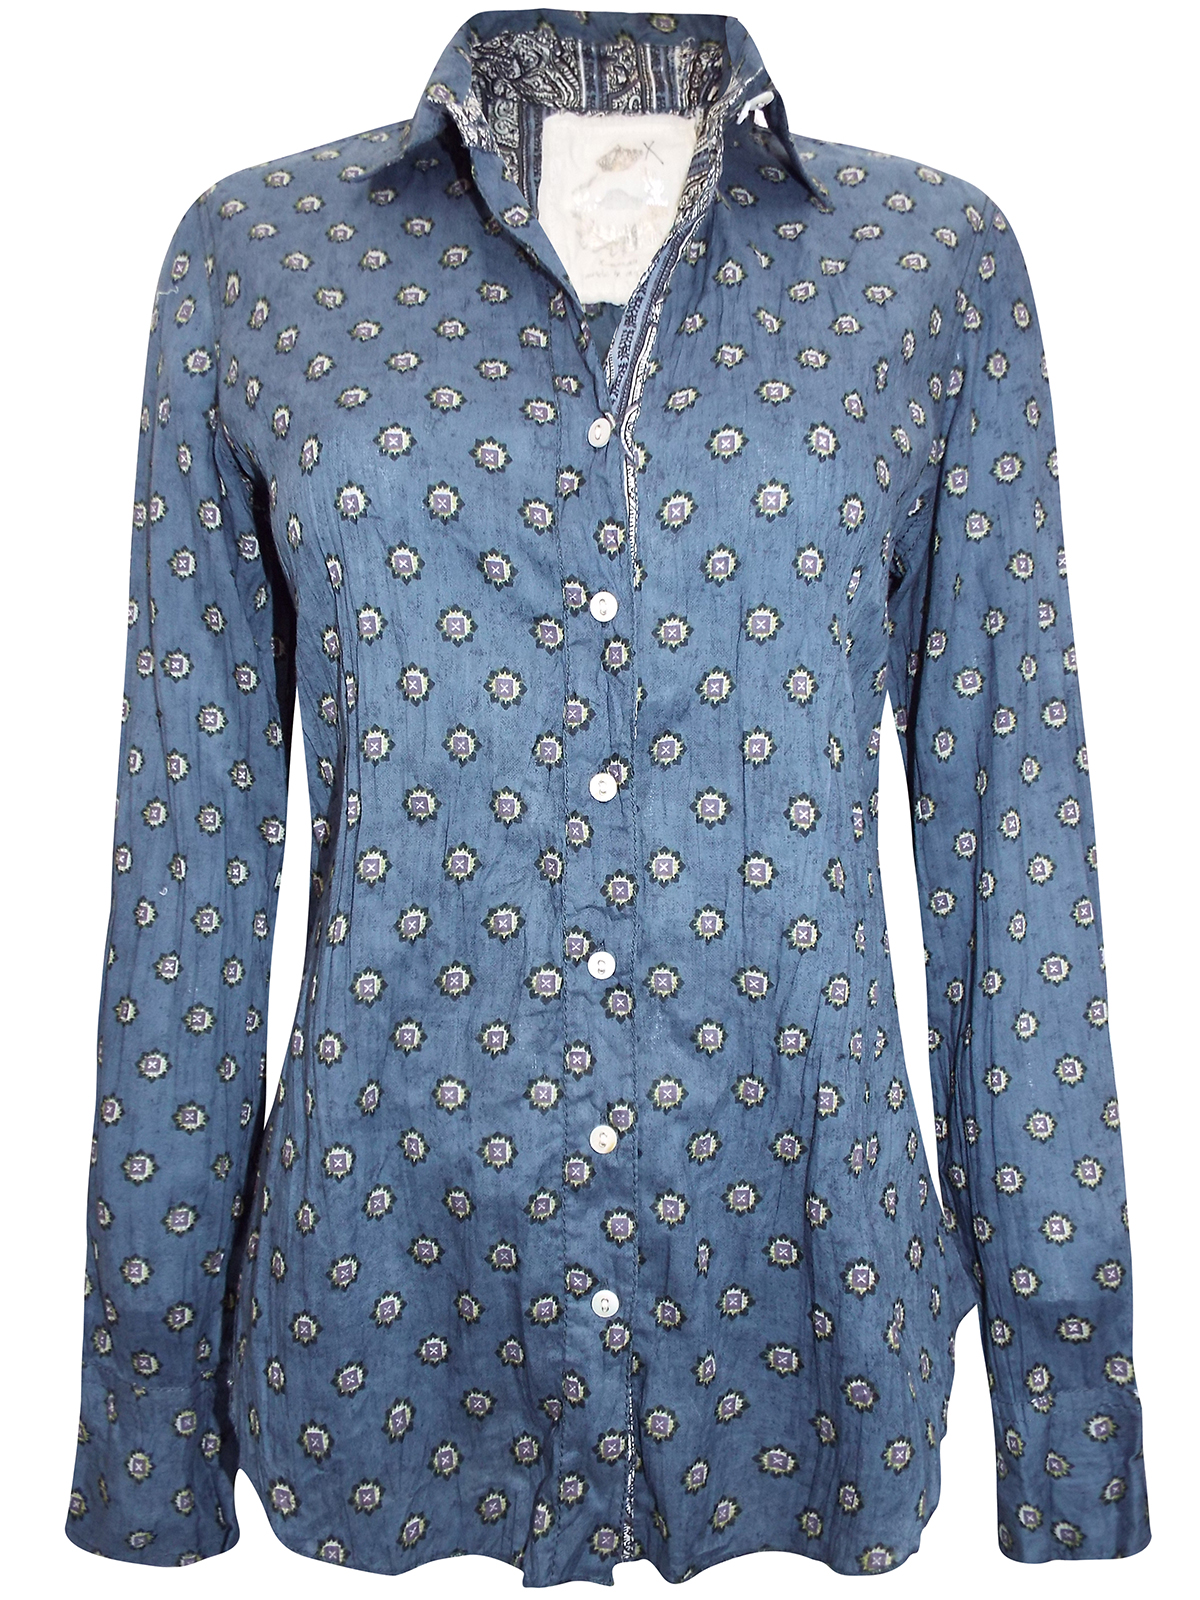 CINO - - CINO NAVY Printed Pure Cotton Crinkle Shirt - Size 10 (XS)